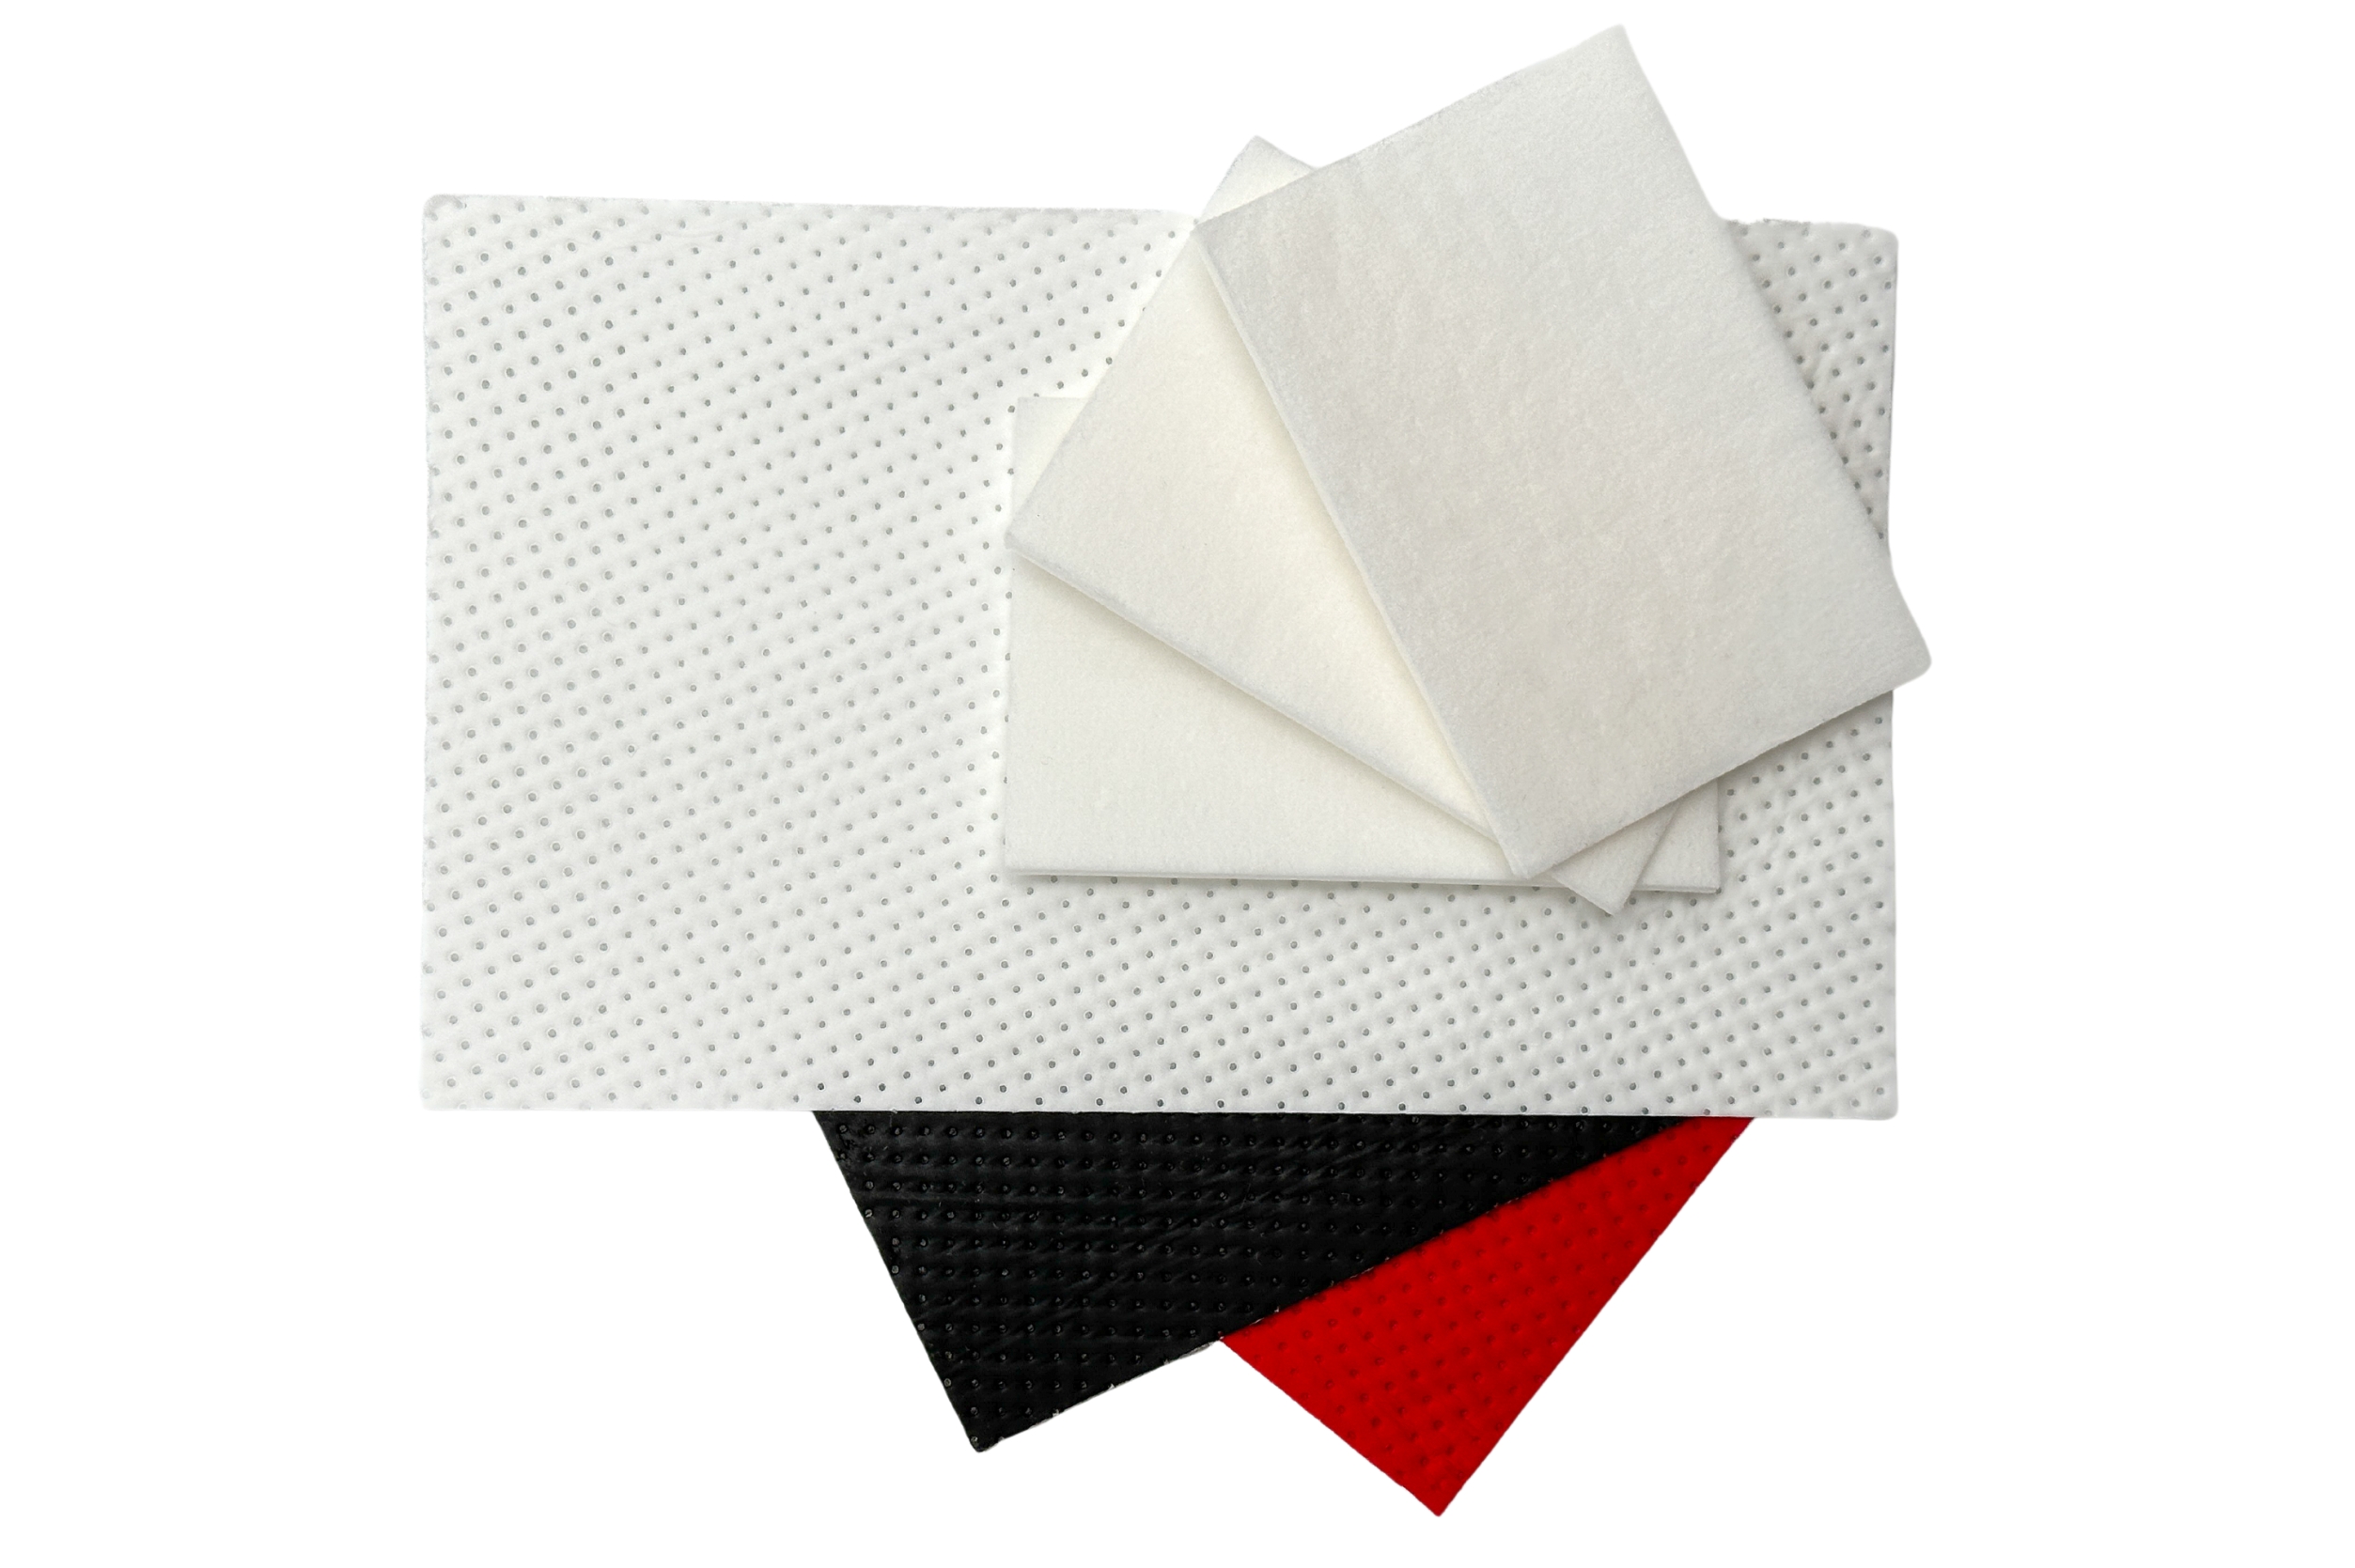 Absorbent pads in red, black and white